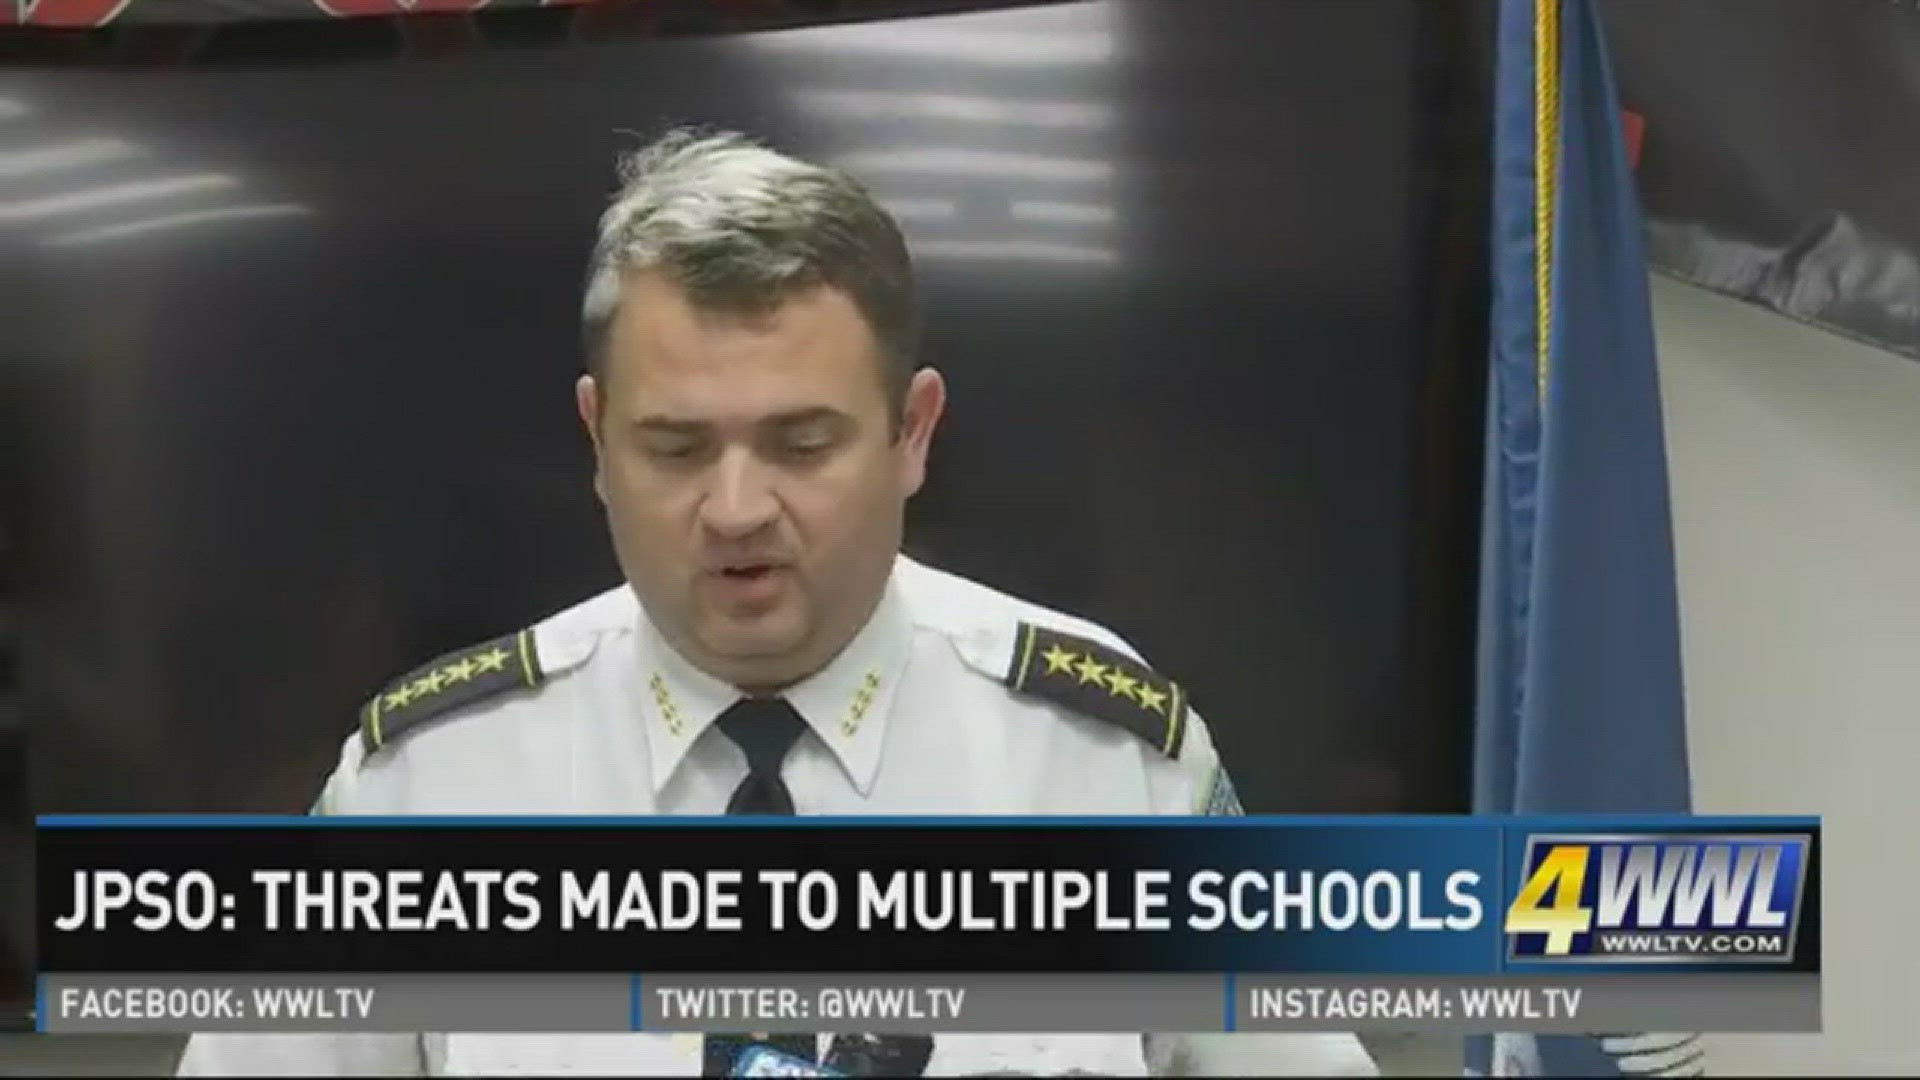 Sheriff Joseph Lopinto speaks on what local law enforcement has been dealing with since the school shooting in Parkland, Florida.